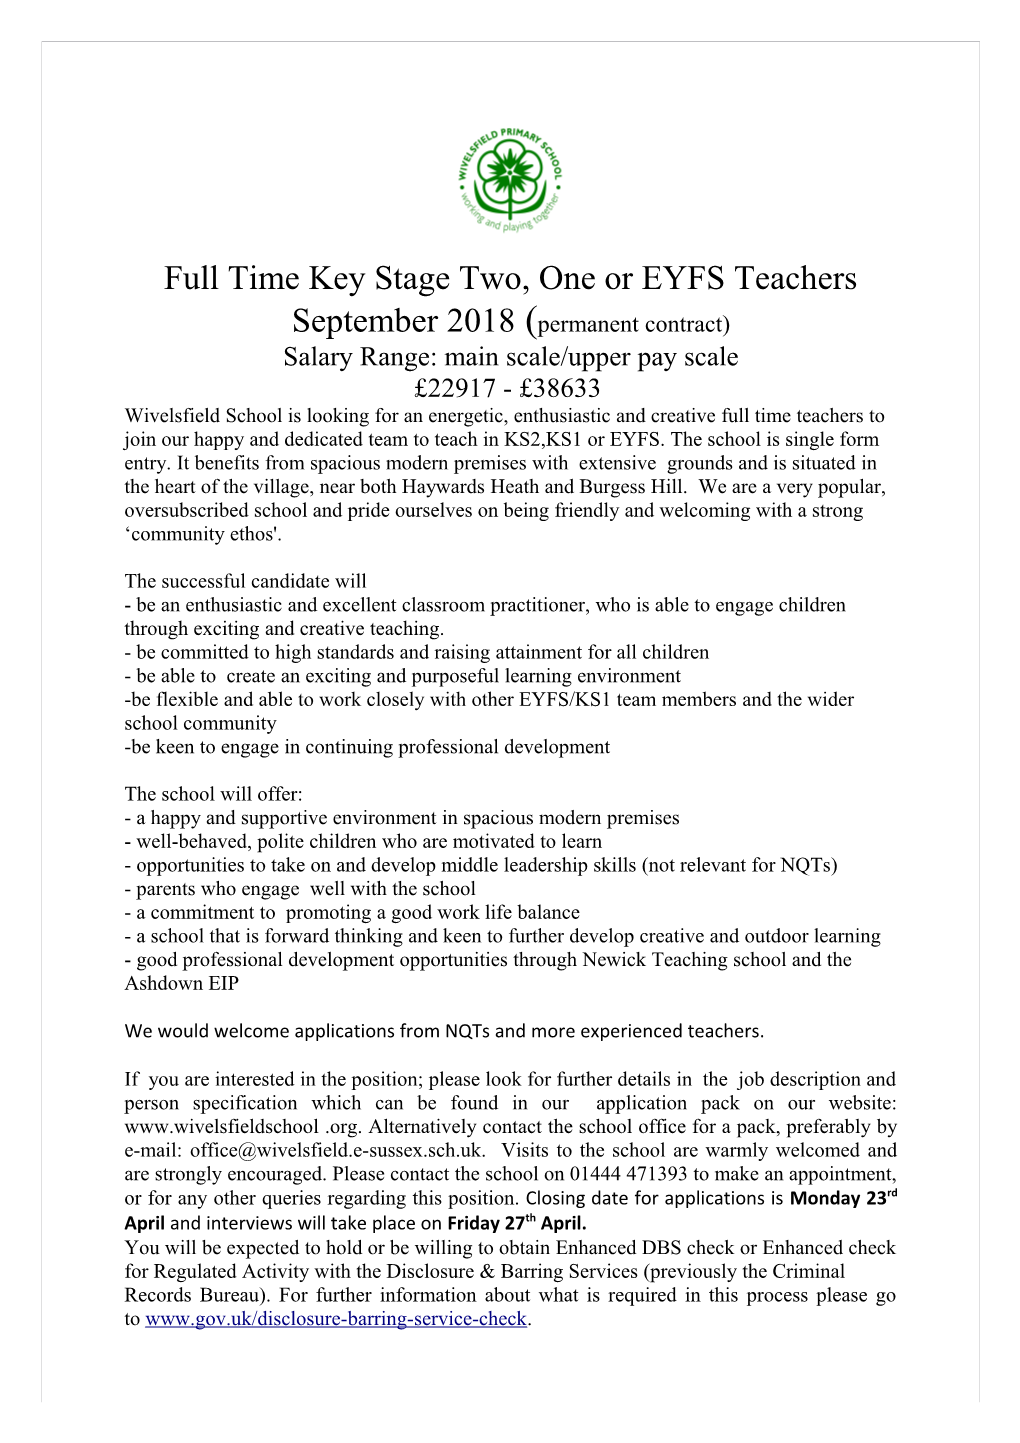 Full Time Key Stage Two, One Or EYFS Teachers